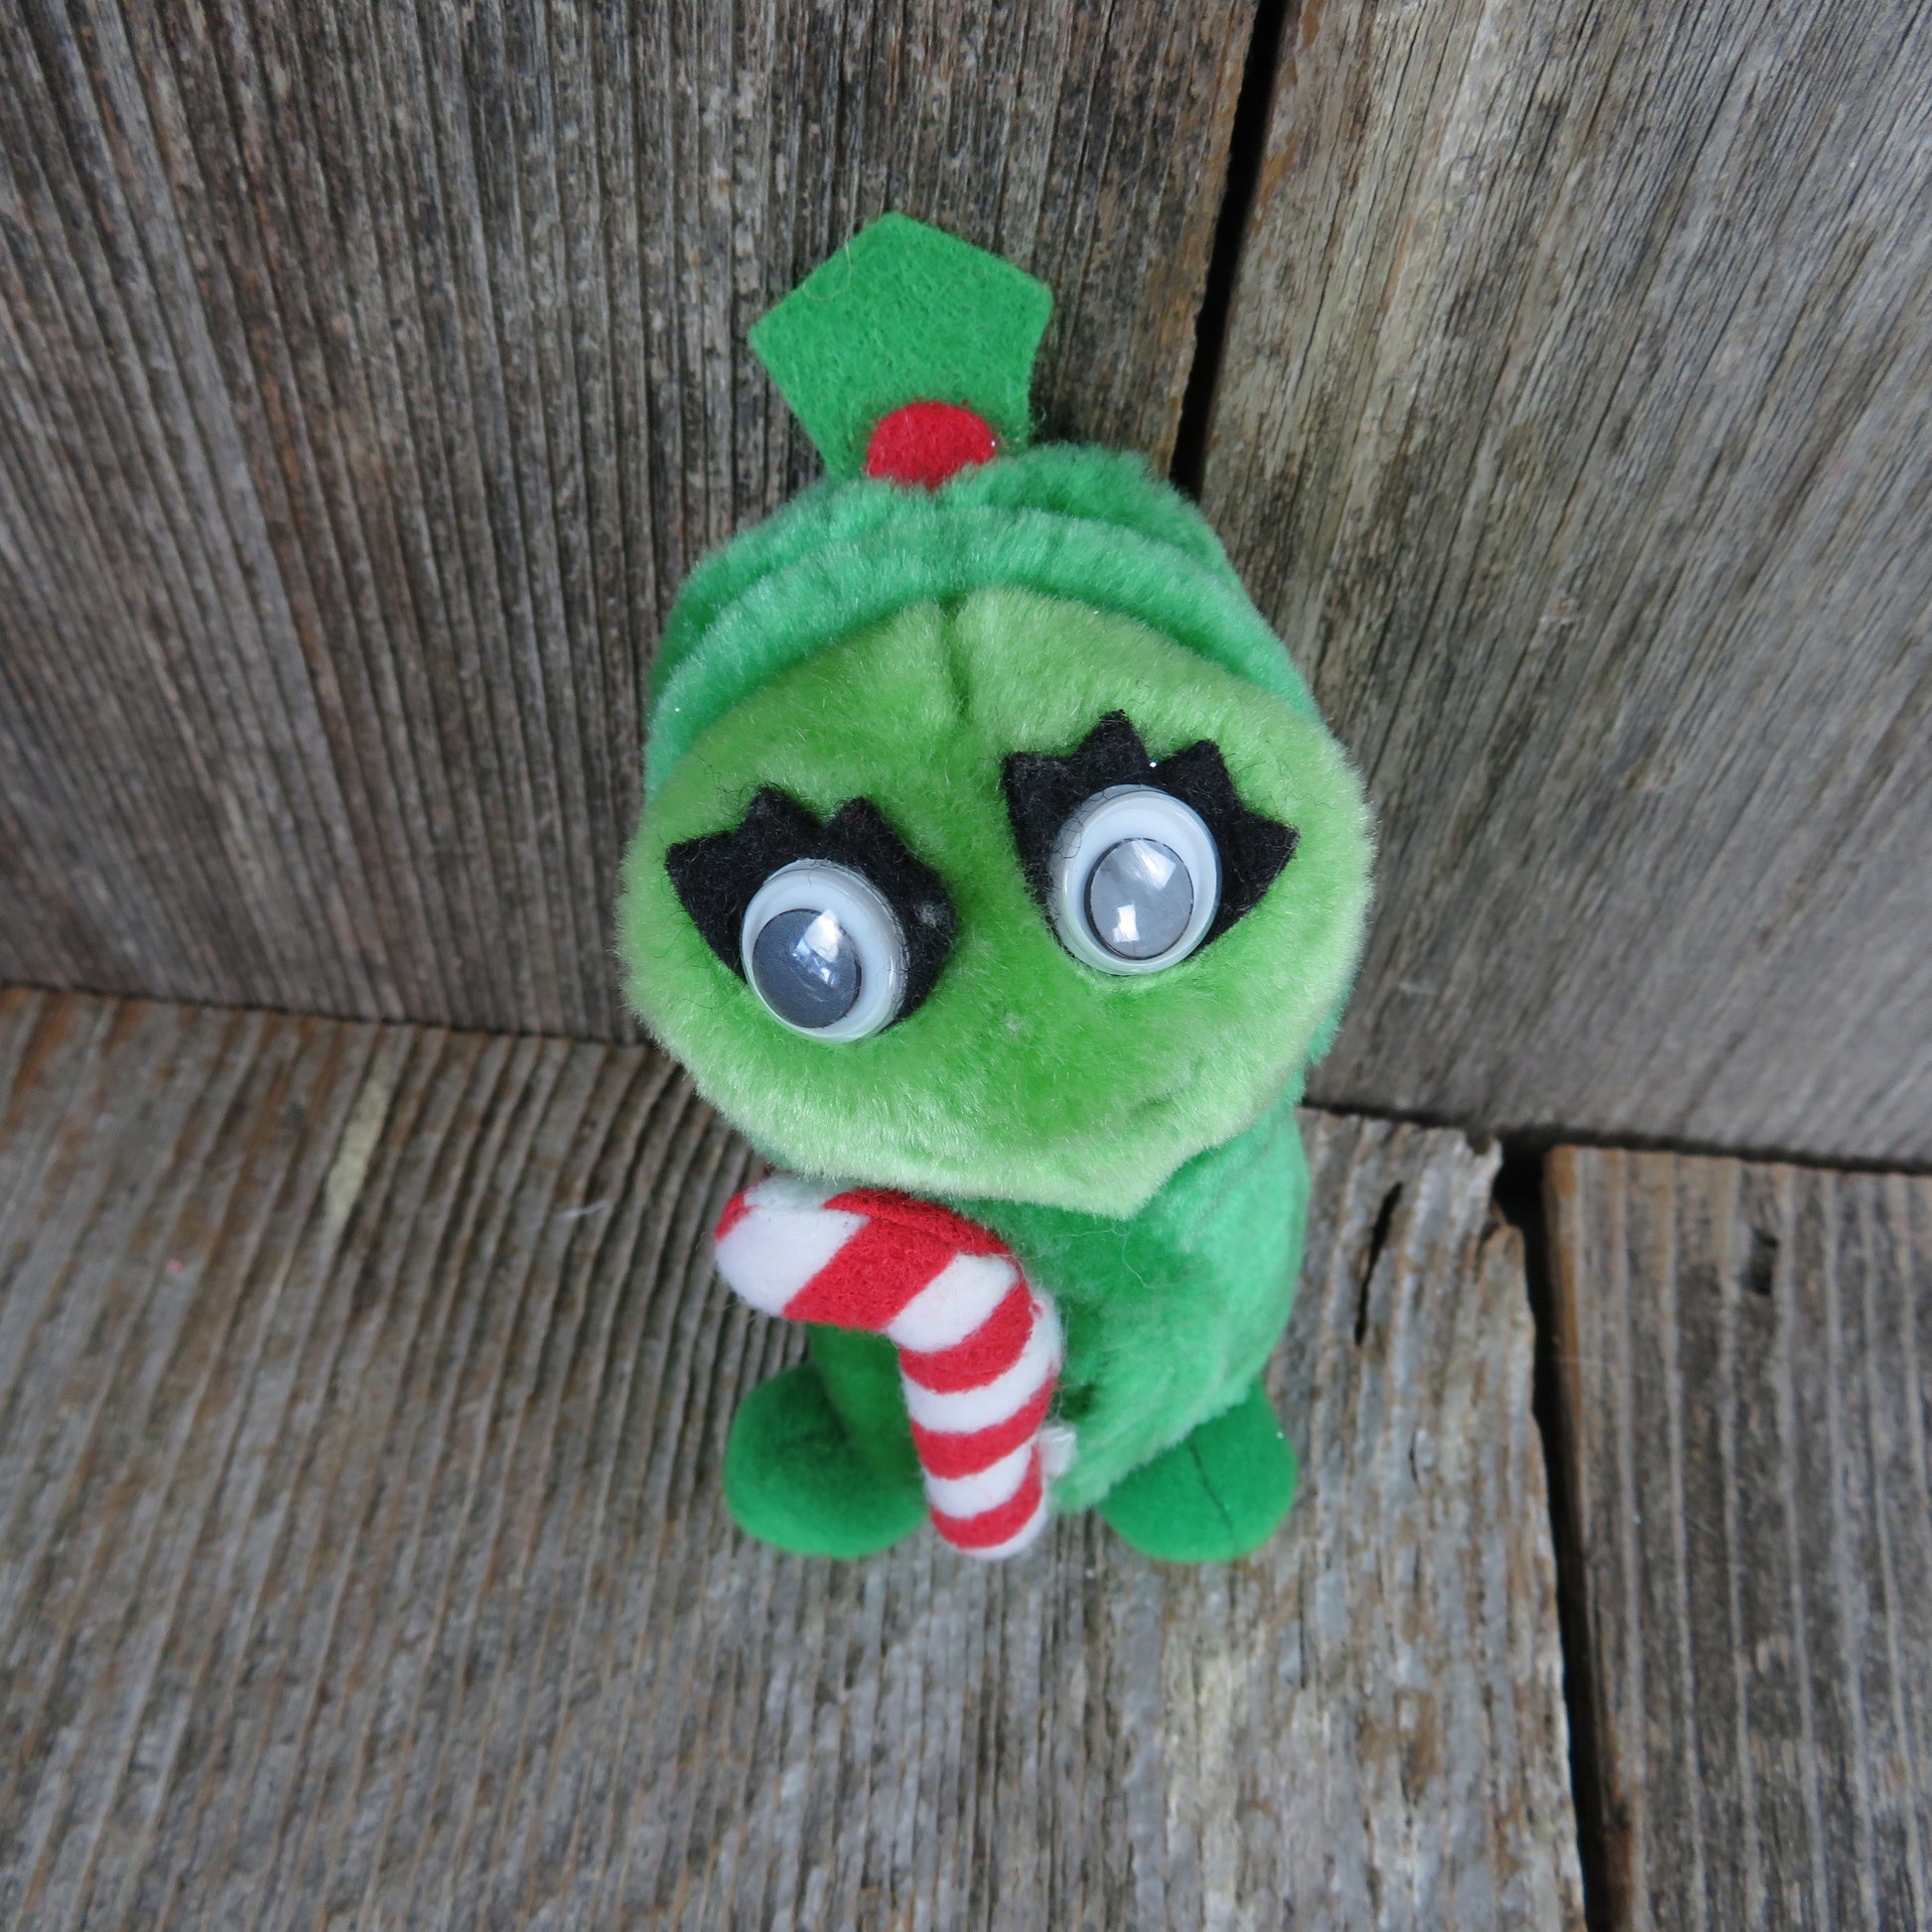 Vintage Peas Ornament Plush Christmas Yumkins Del Monte Fruit and Vegetables 1991 Green Candy Cane - At Grandma's Table